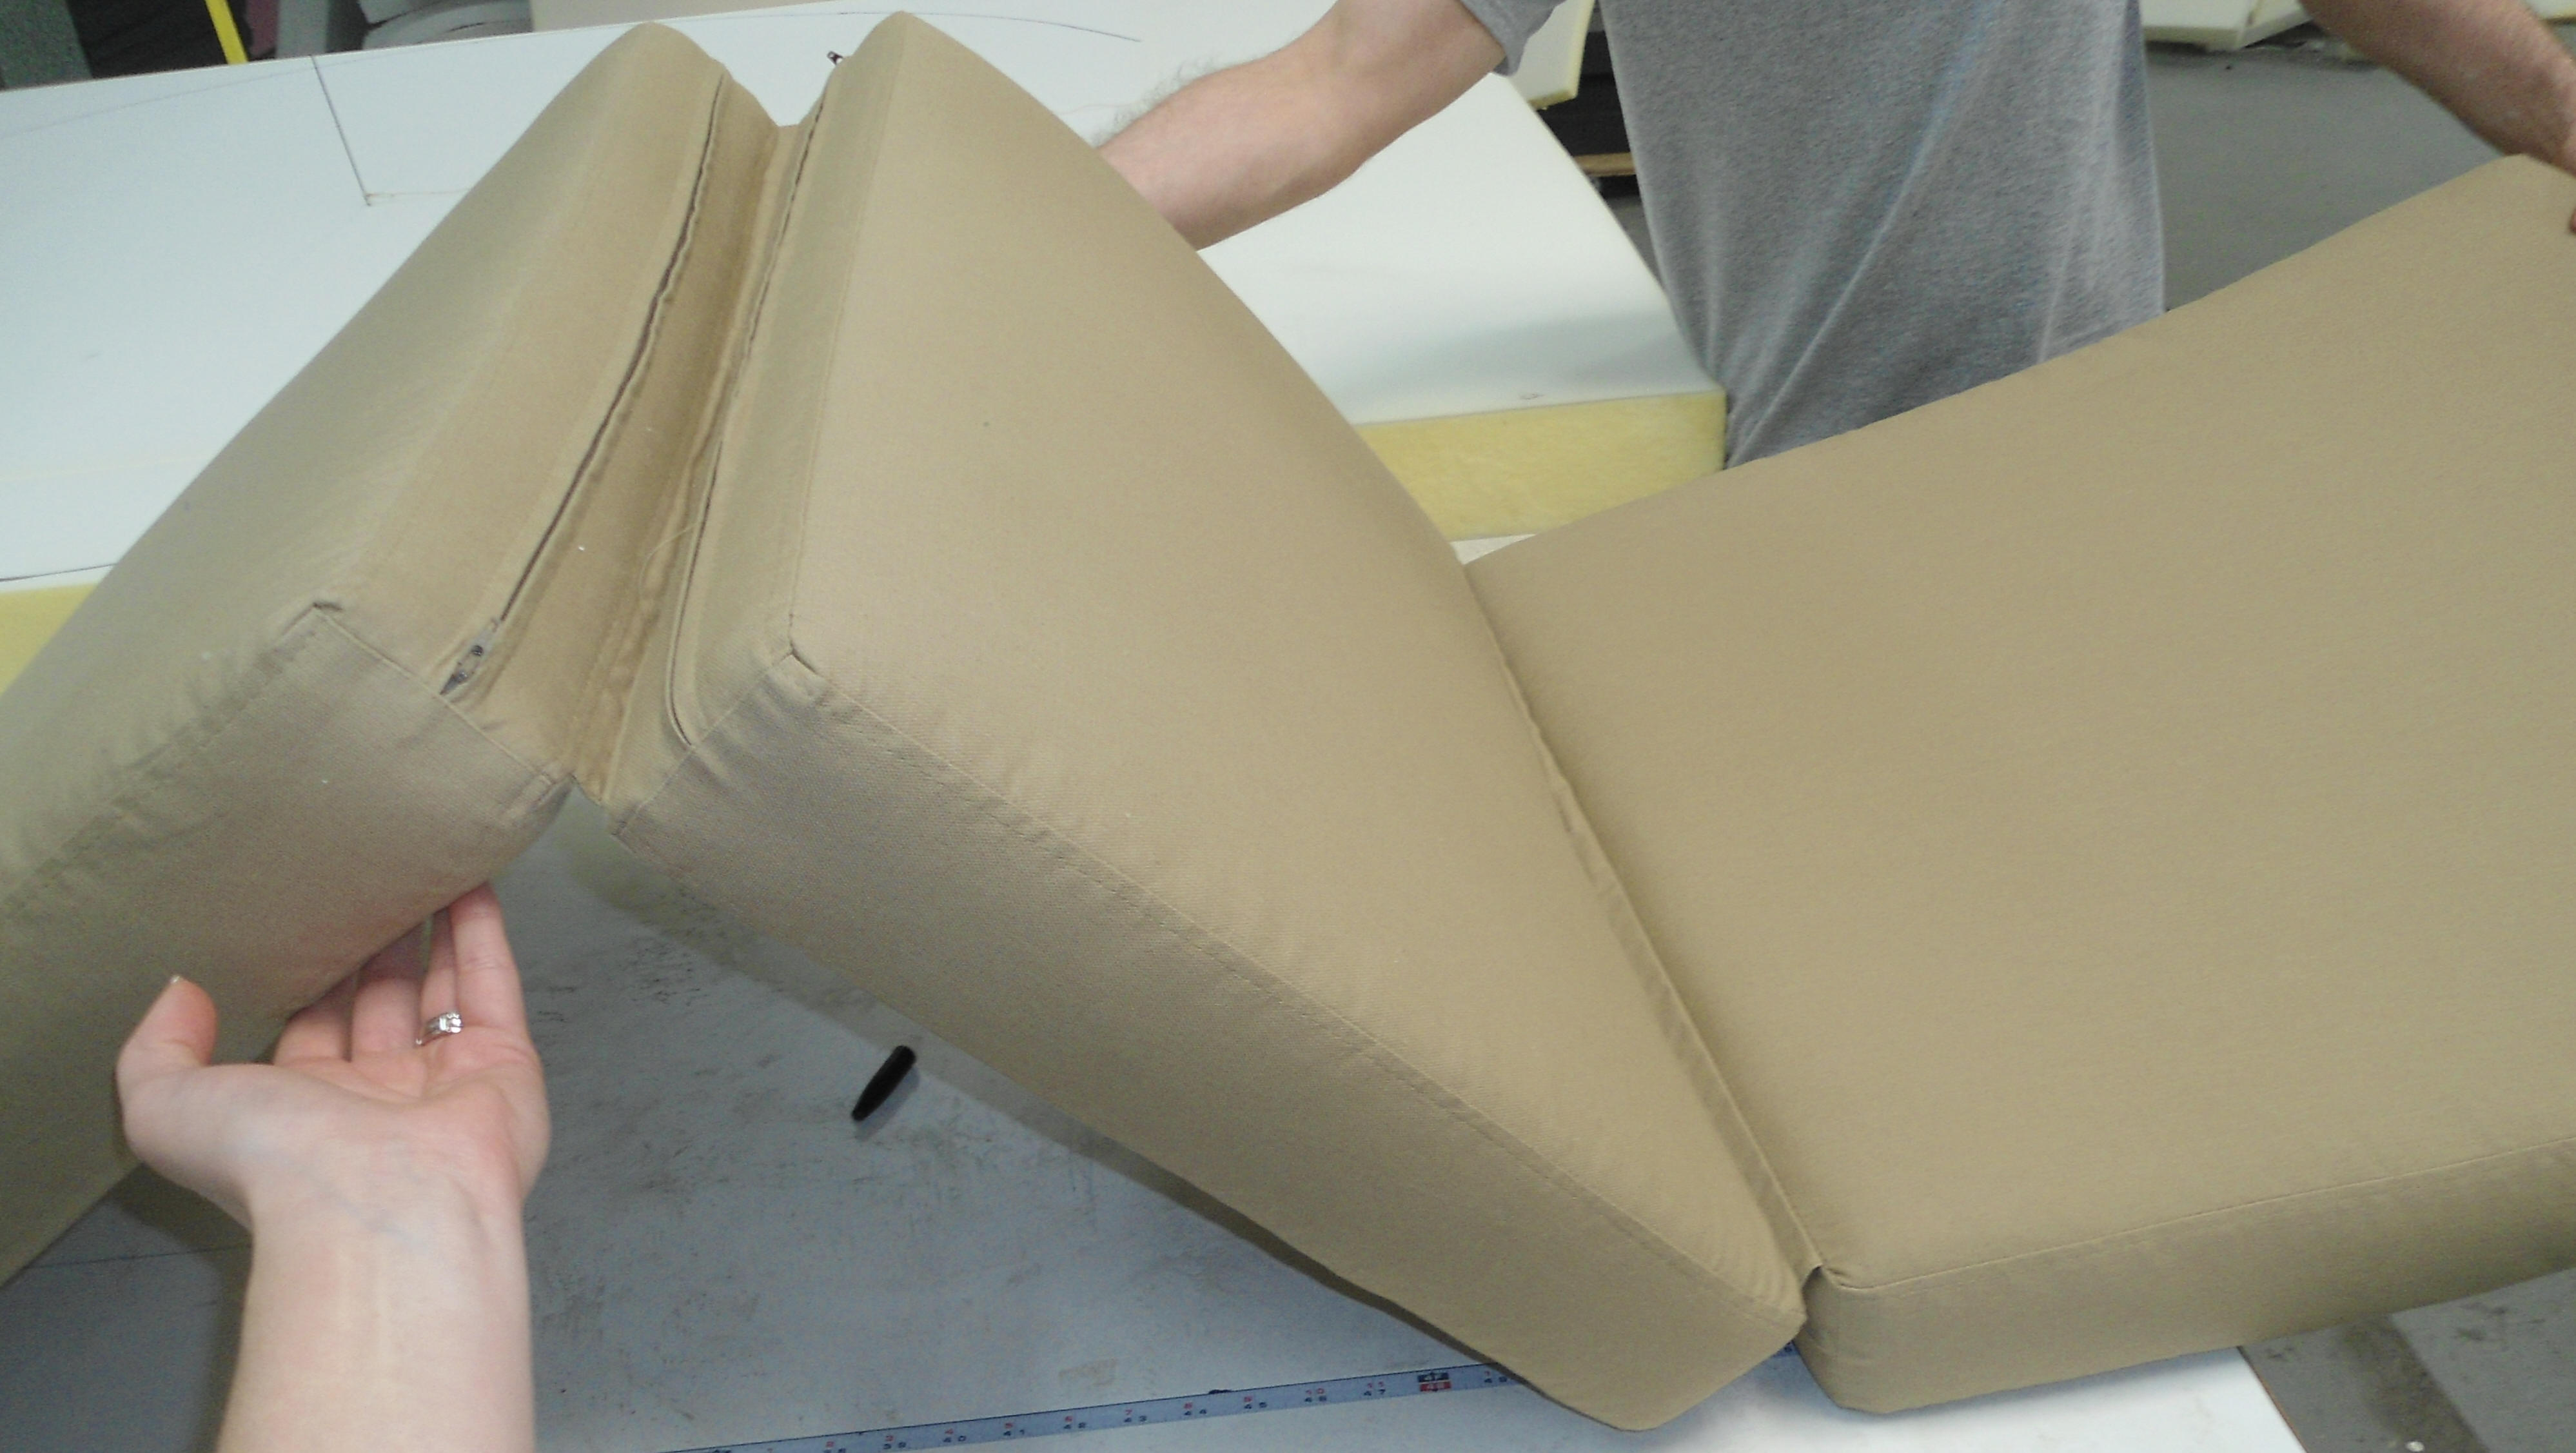 upholstery cover for trifold mattress